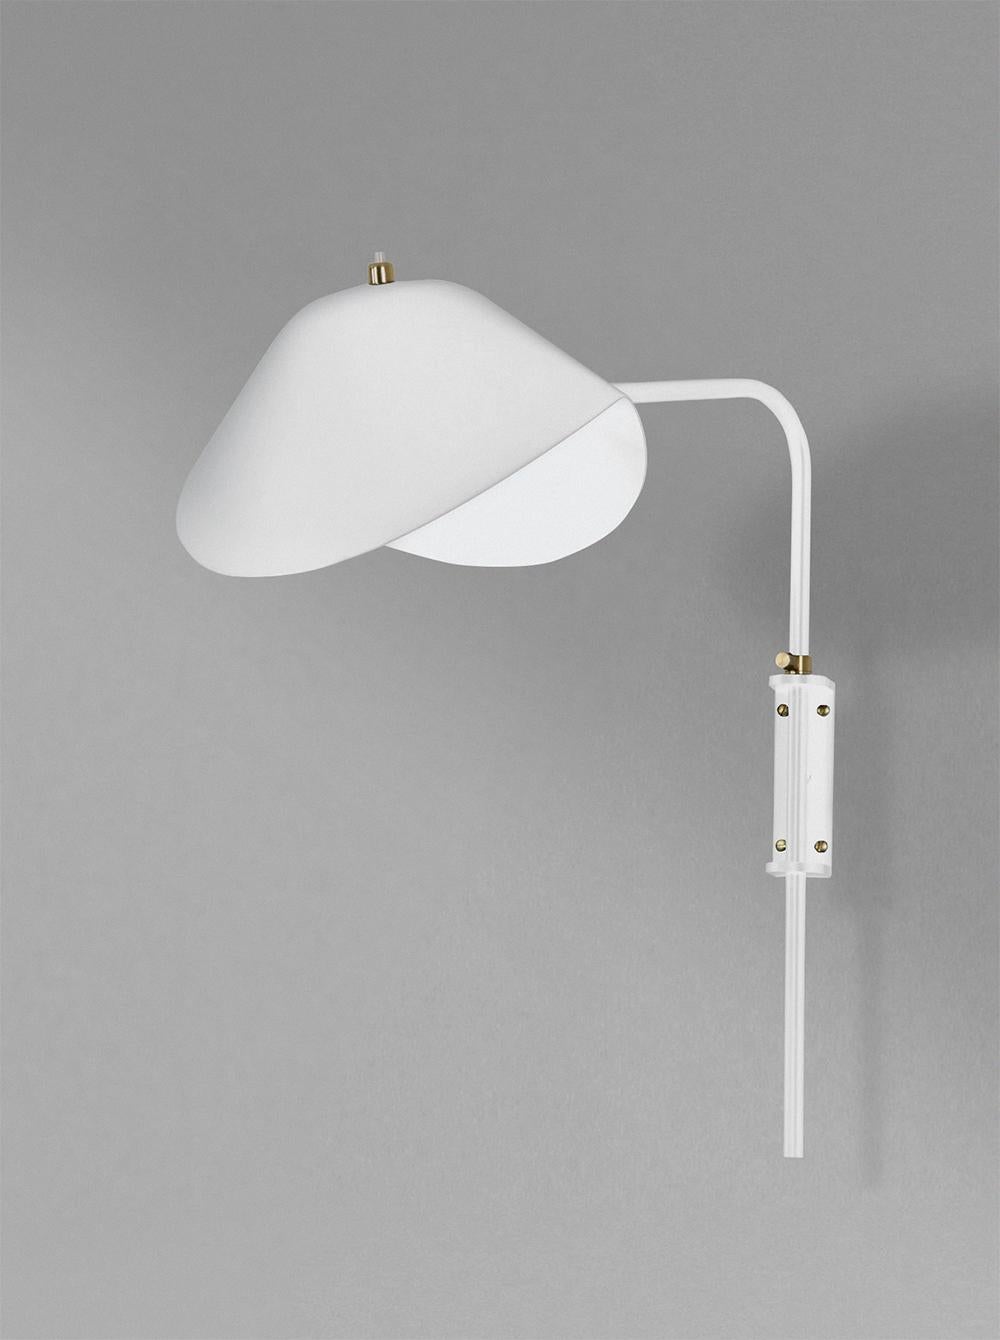 Wall sconce lamp model 'Anthony wall lamp whit fixing bracket' designed by Serge Mouille in 1952.

Manufactured by Editions Serge Mouille in France. The production of lamps, wall lights and floor lamps are manufactured using craftsman’s techniques